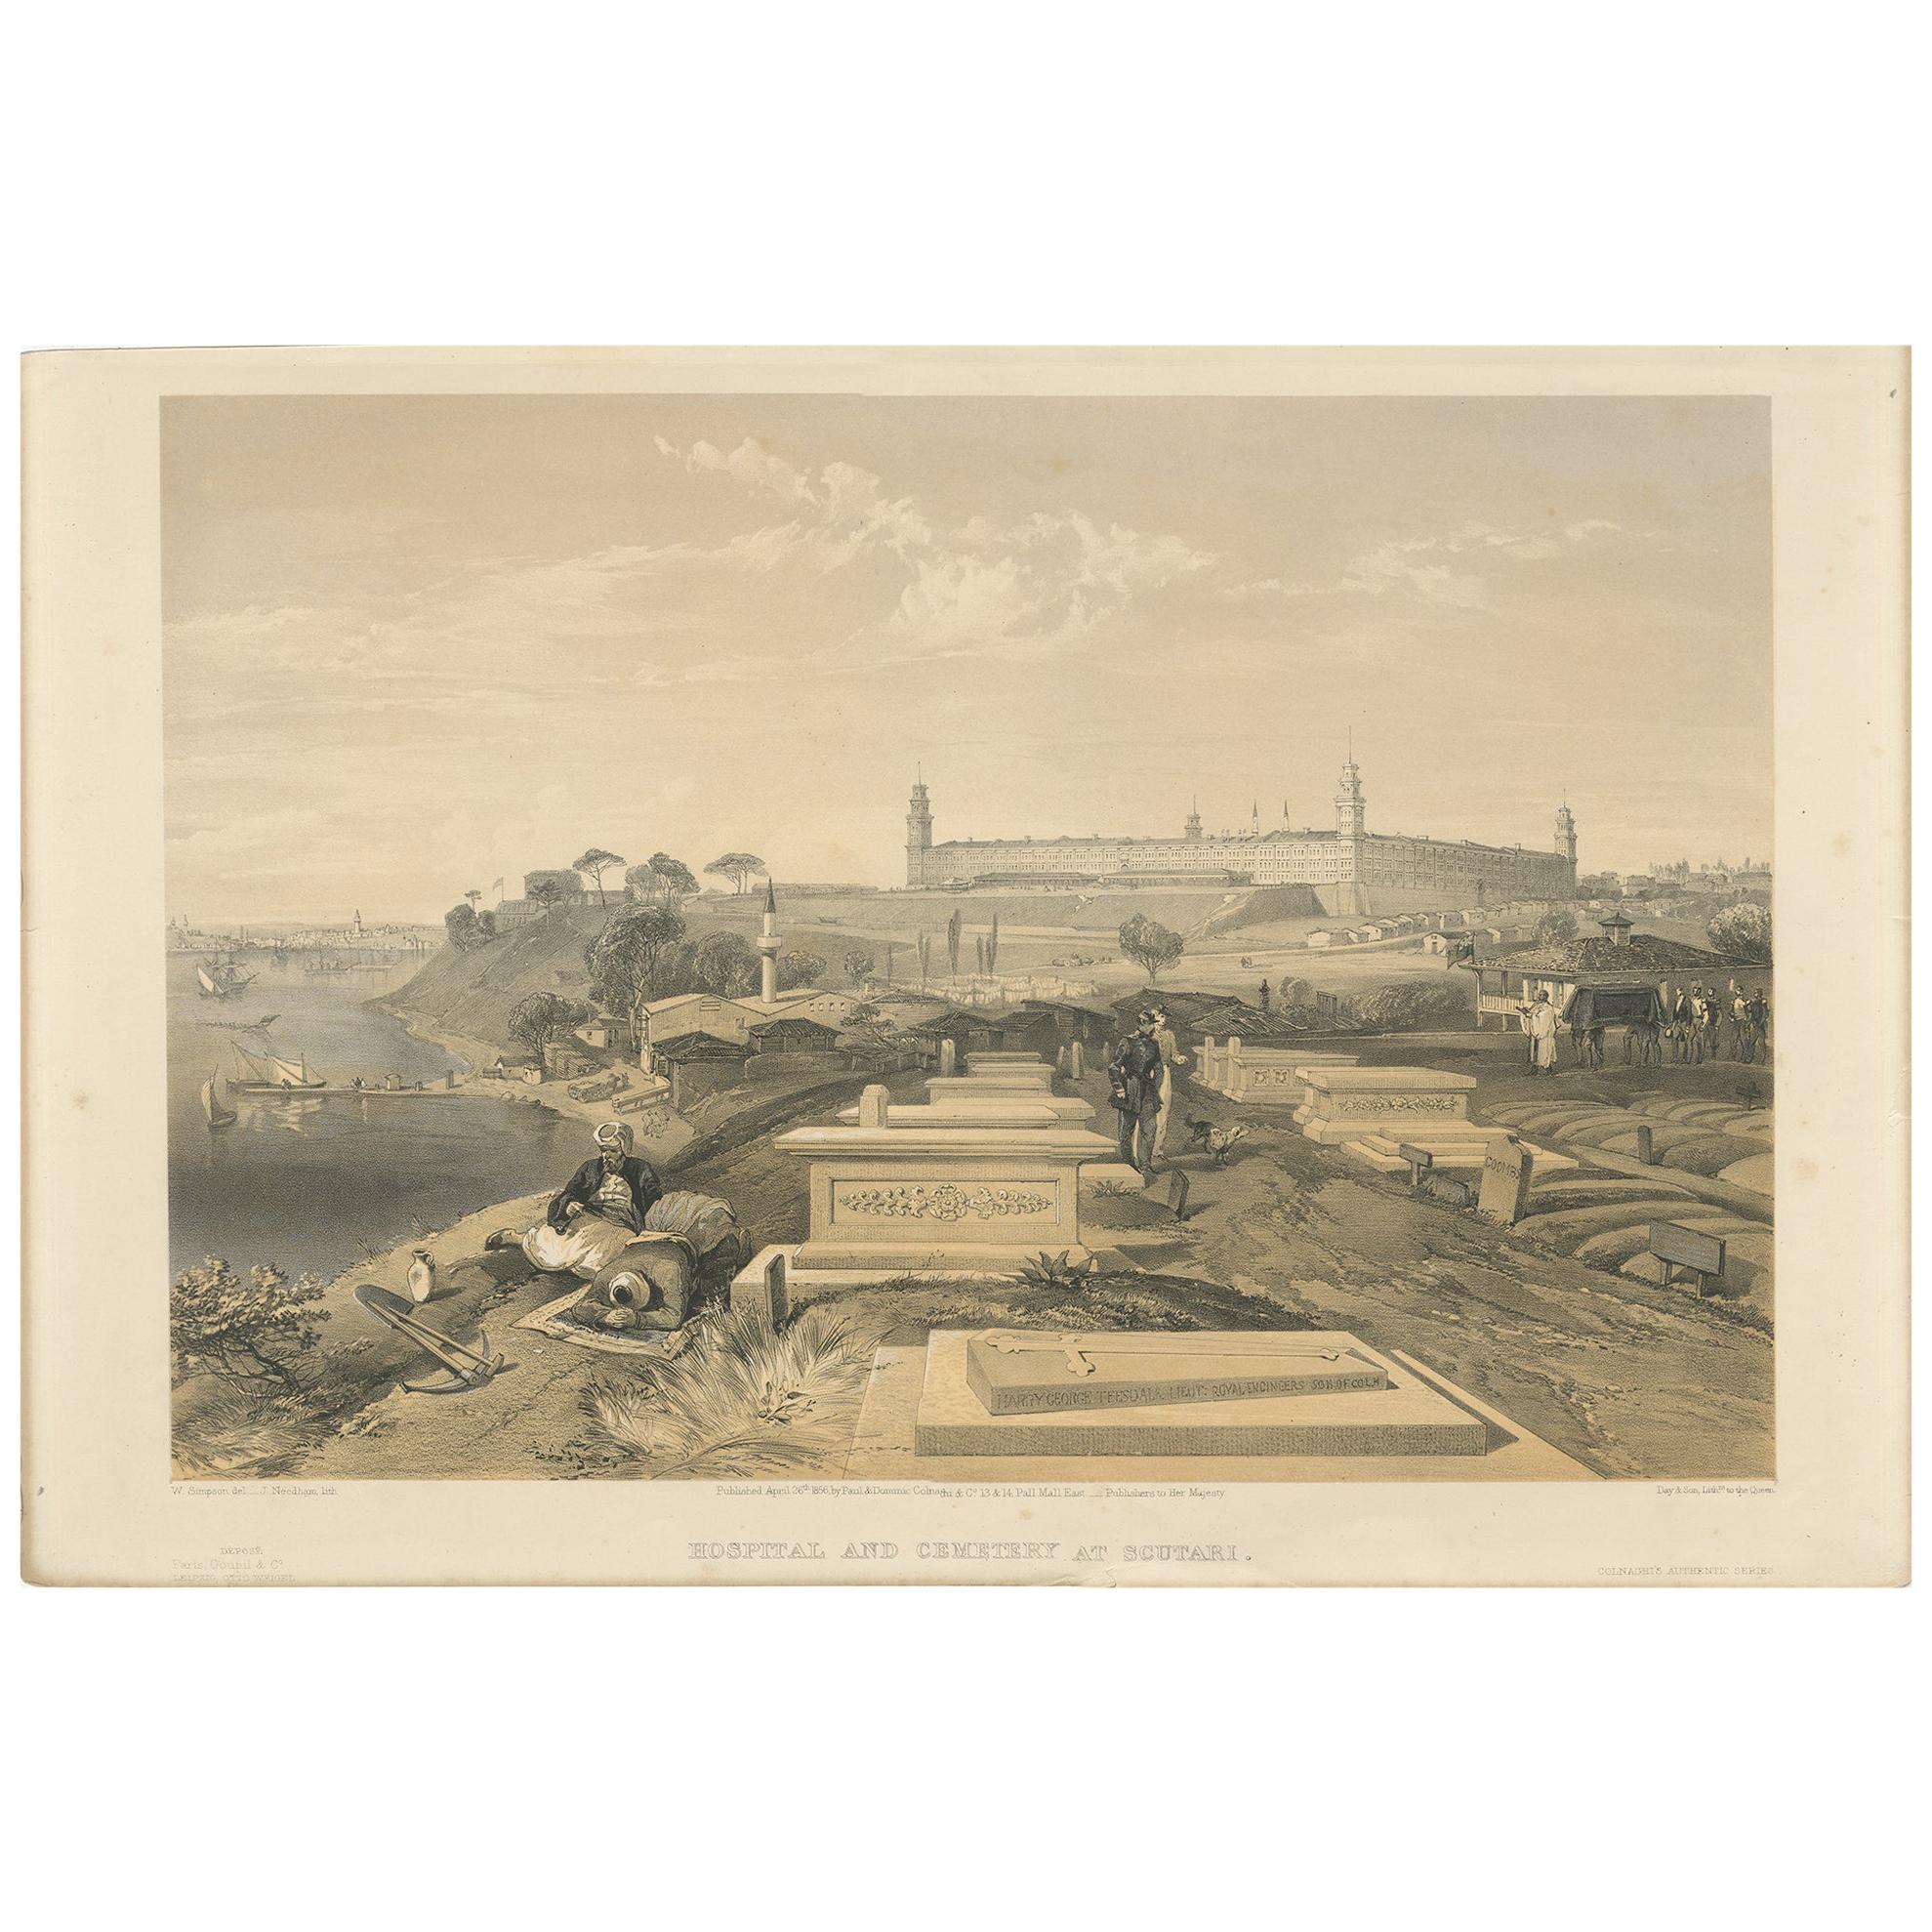 Antique Print of a Hospital and Cemetery at Scutari by Colnaghi, 1856 For Sale